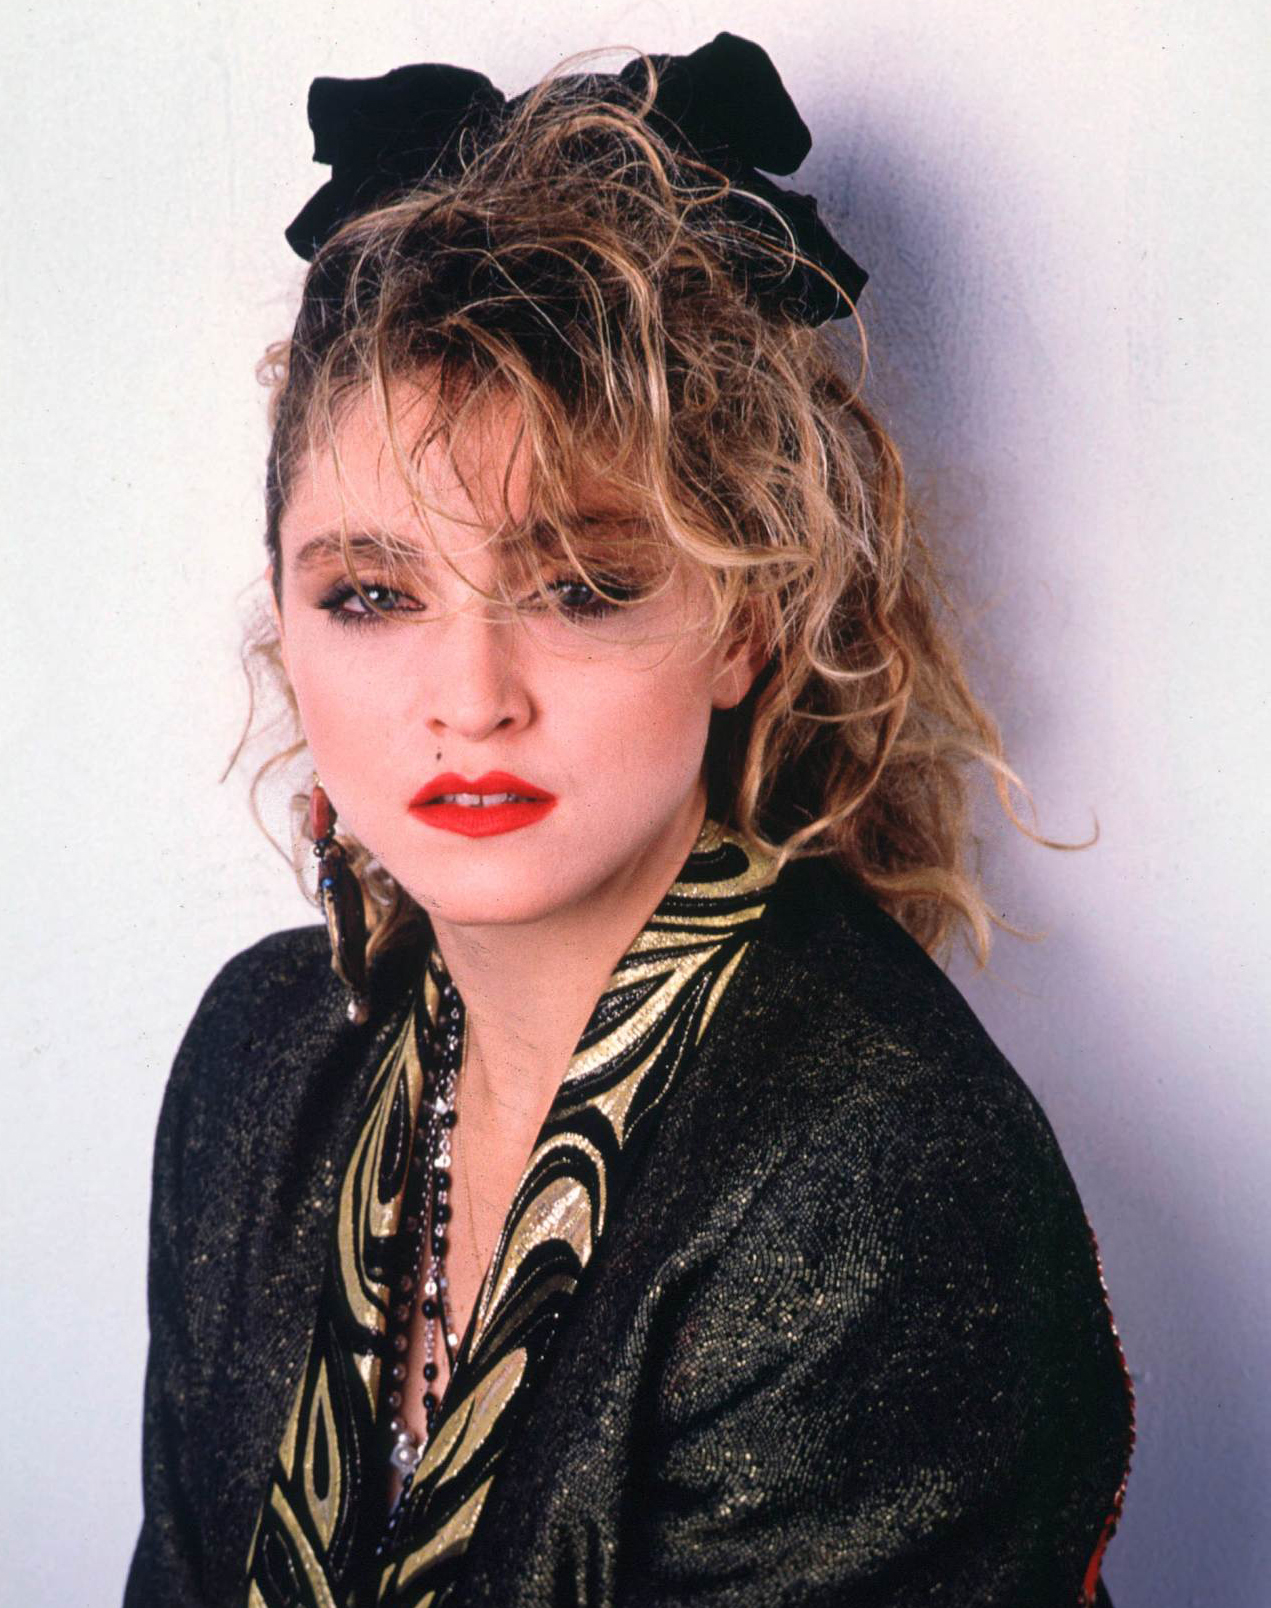 madonna_into_the_groove_1985.jpg